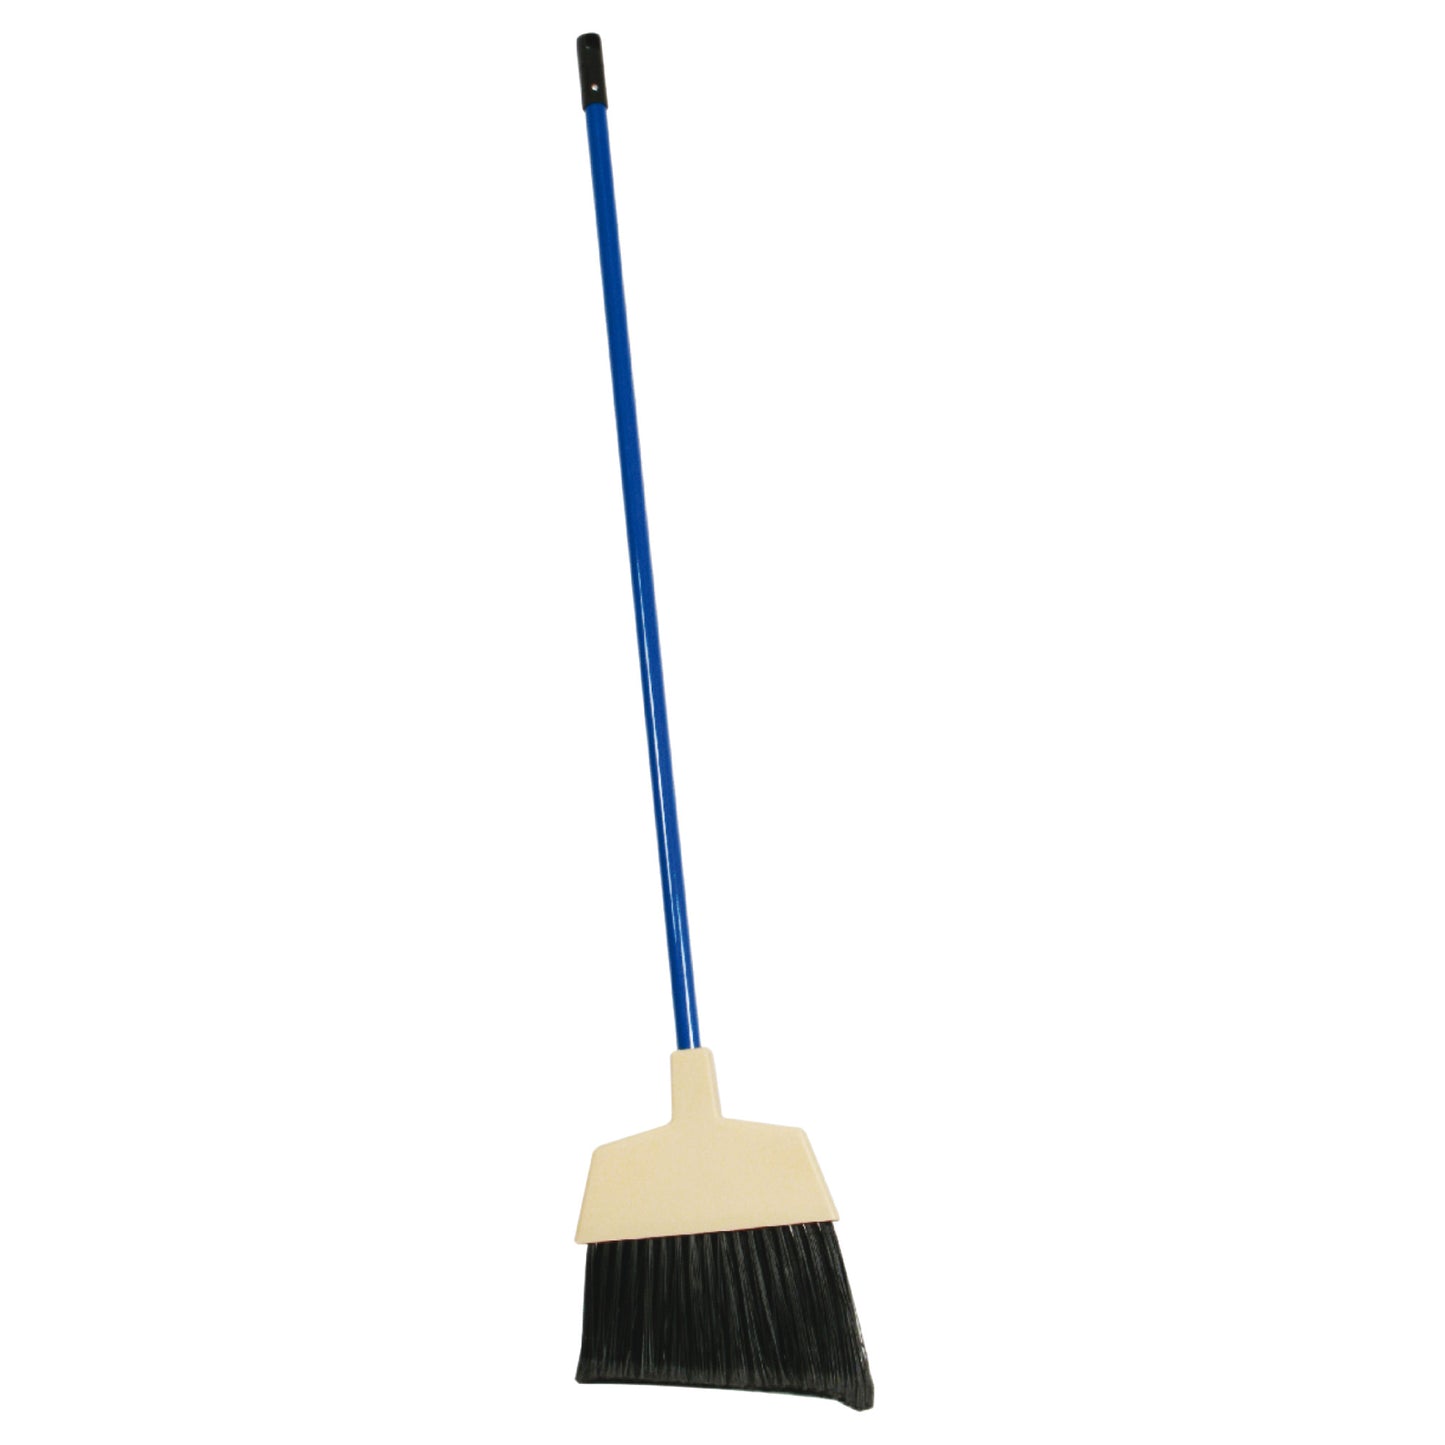 BRM-60L - Angled Broom with 55" Handle, Flagged